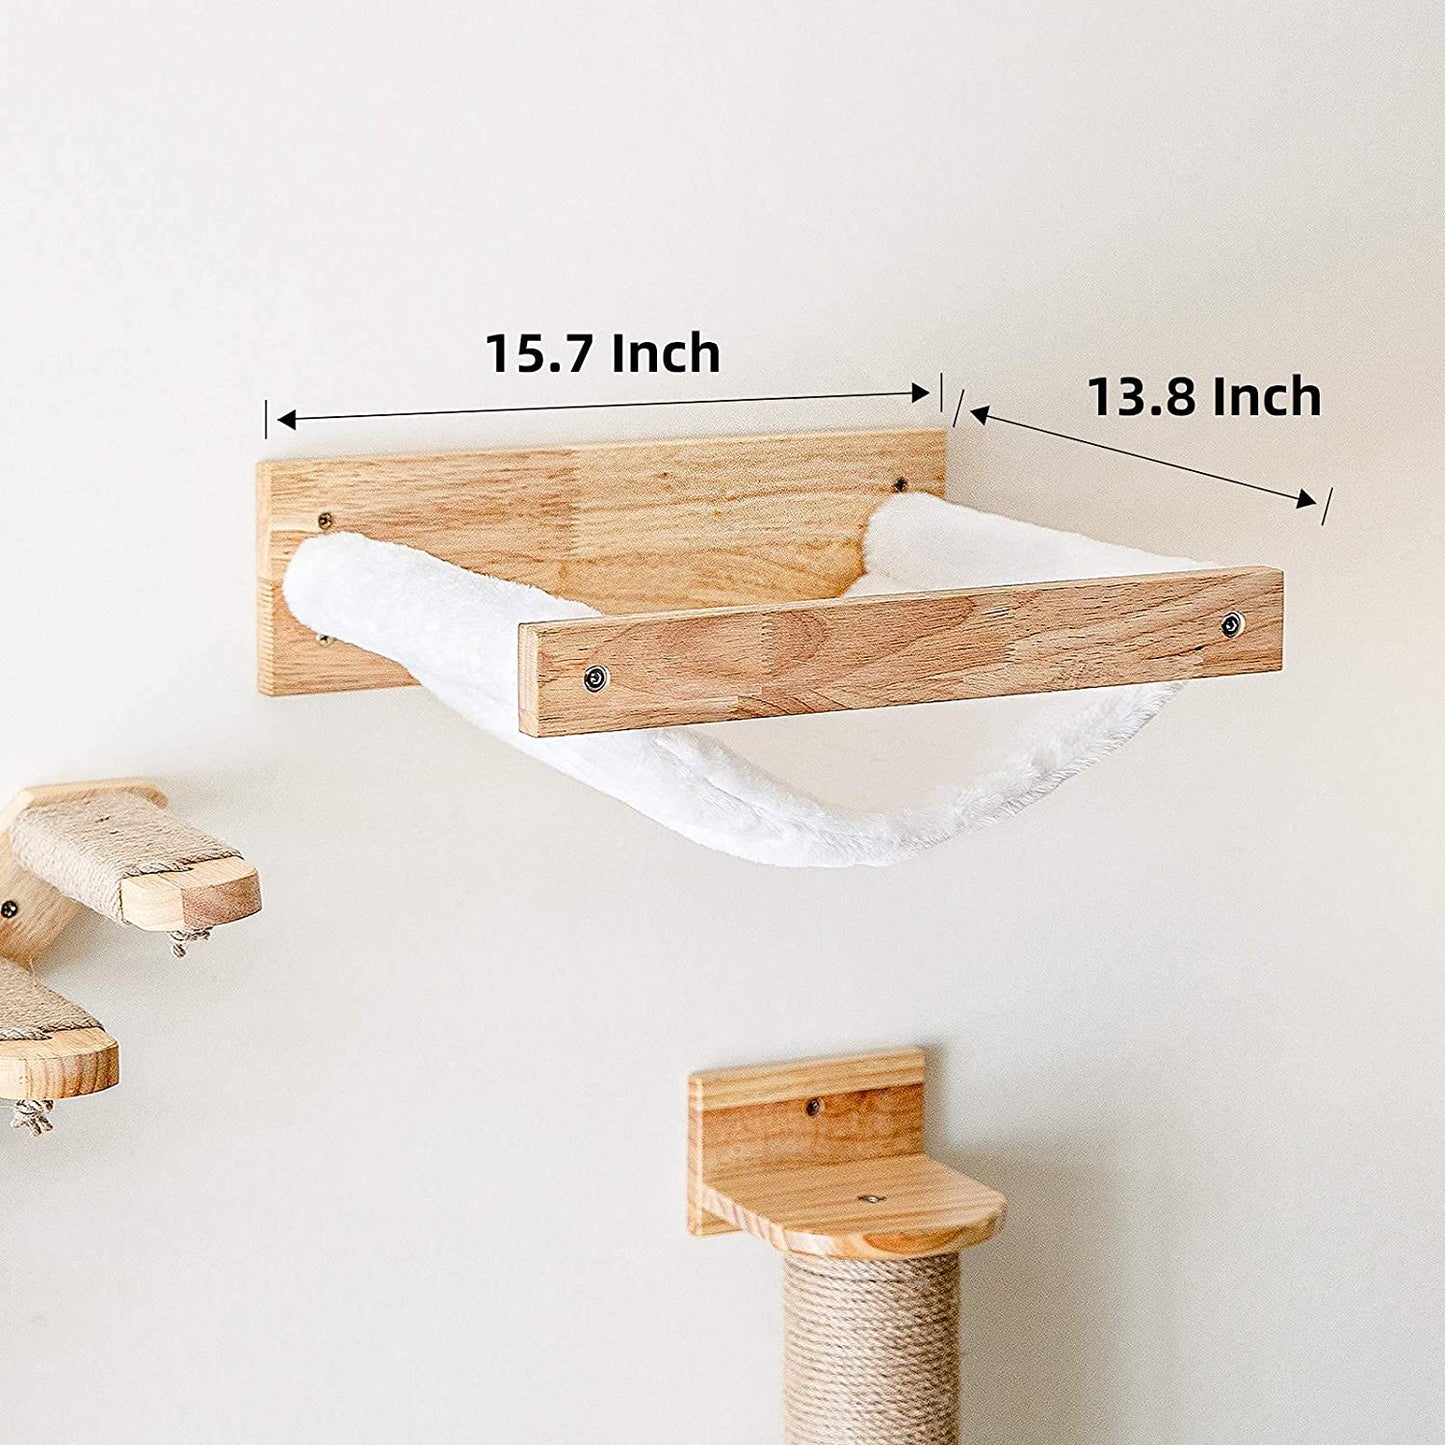 FUKUMARU Cat Hammock Wall Mounted Large Cats Shelf - Modern Beds and Perches - Premium Kitty Furniture for Sleeping, Playing, Climbing, and Lounging - Easily Holds up to 40 Lbs